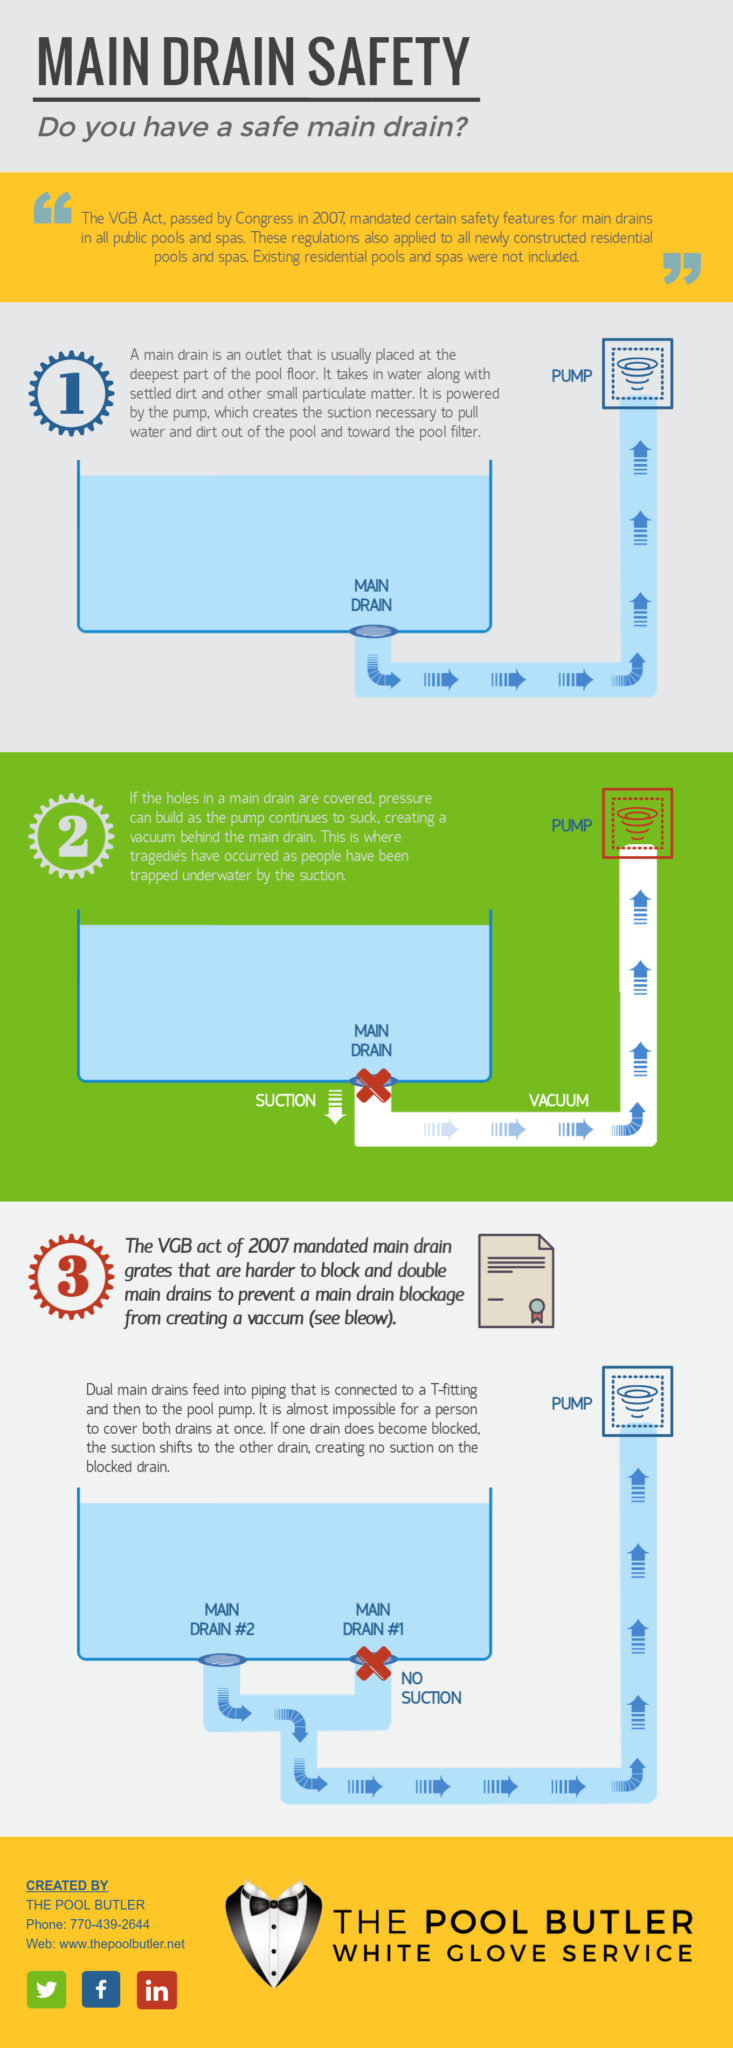 Main Drain Safety [infographic]